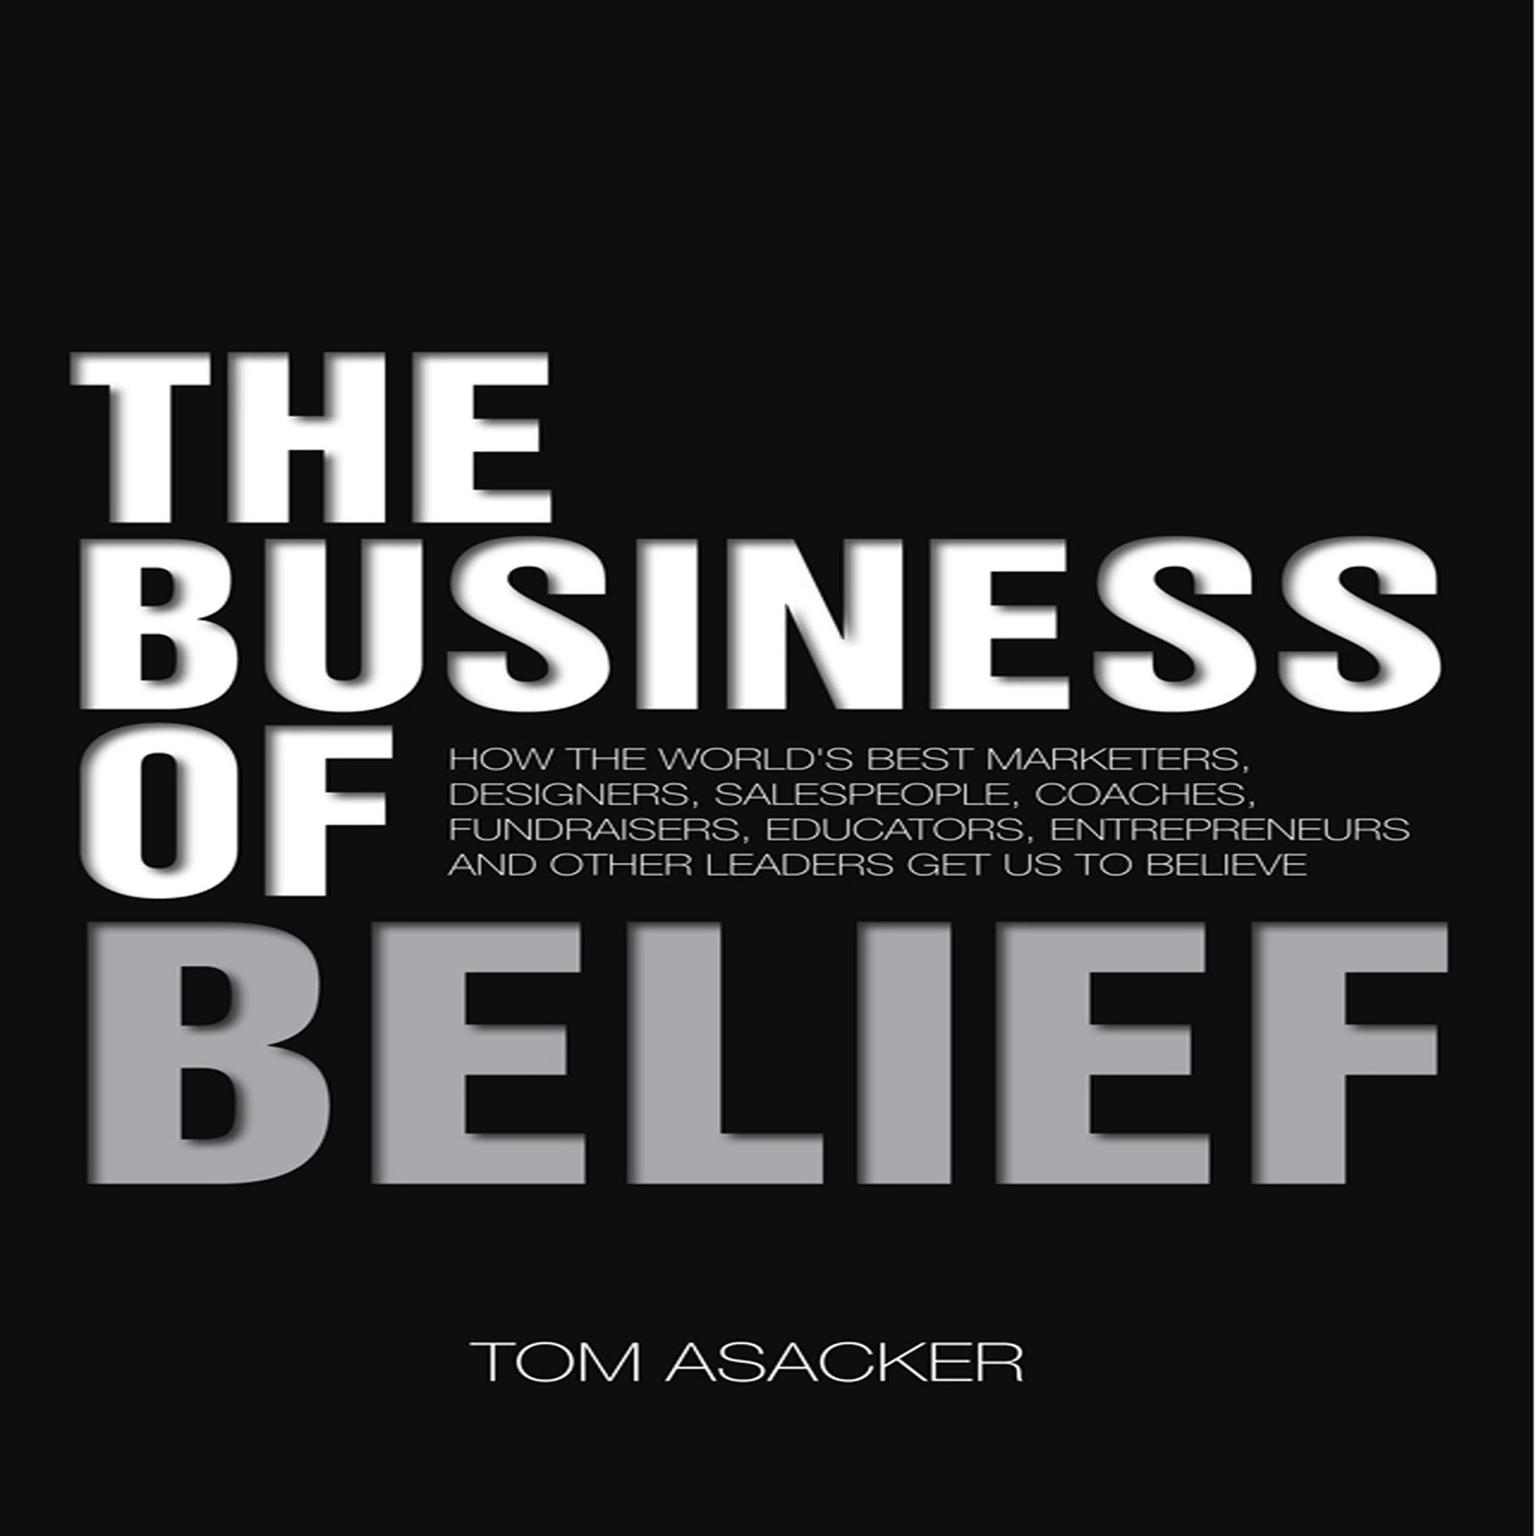 The Business of Belief: How the Worlds Best Marketers, Designers, Salespeople, Coaches, Fundraisers, Educators, Entrepreneurs and Other Leaders Get Us to Believe Audiobook, by Tom Asacker